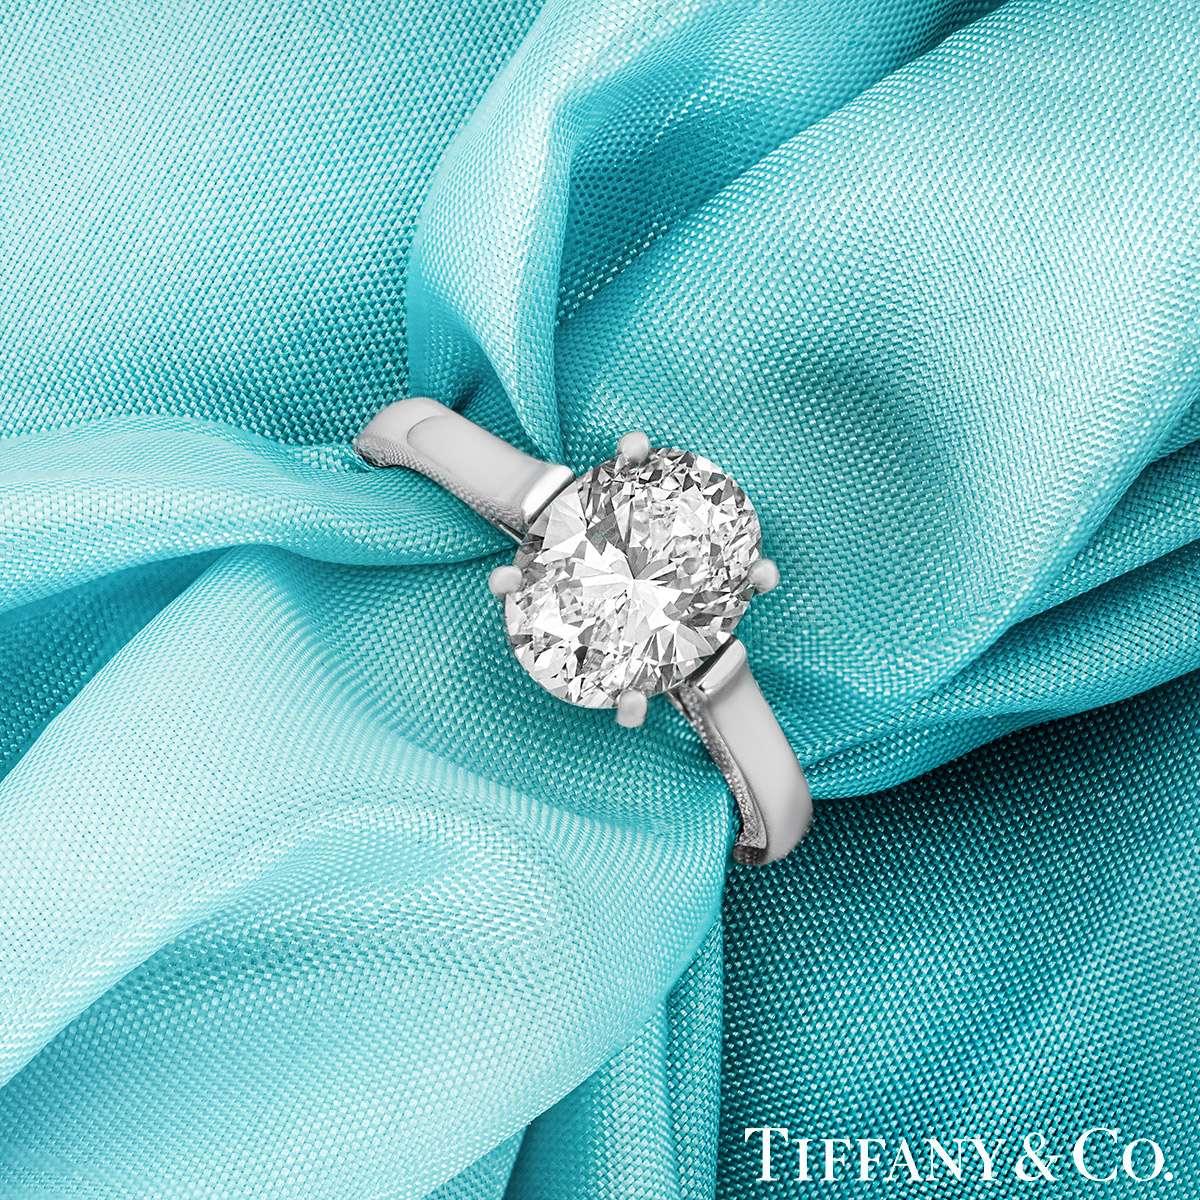 Women's Tiffany & Co. Platinum Oval Diamond Engagement Ring 2.06 Ct D/VVS2 GIA Certified For Sale